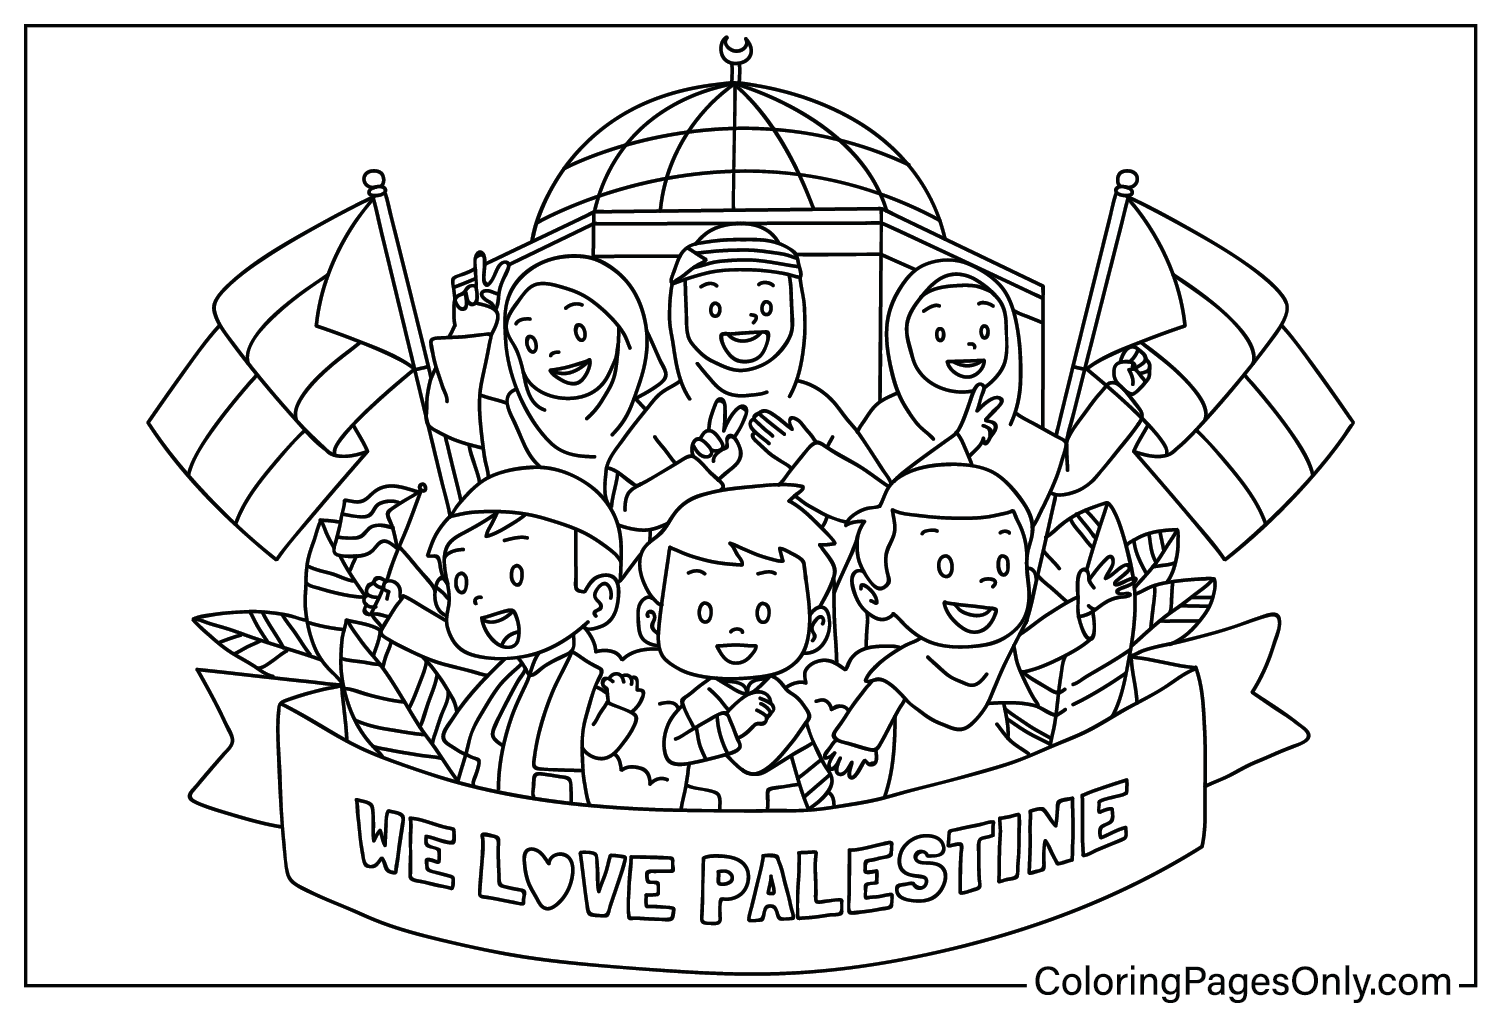 Coloring Page Free Palestine from Palestine